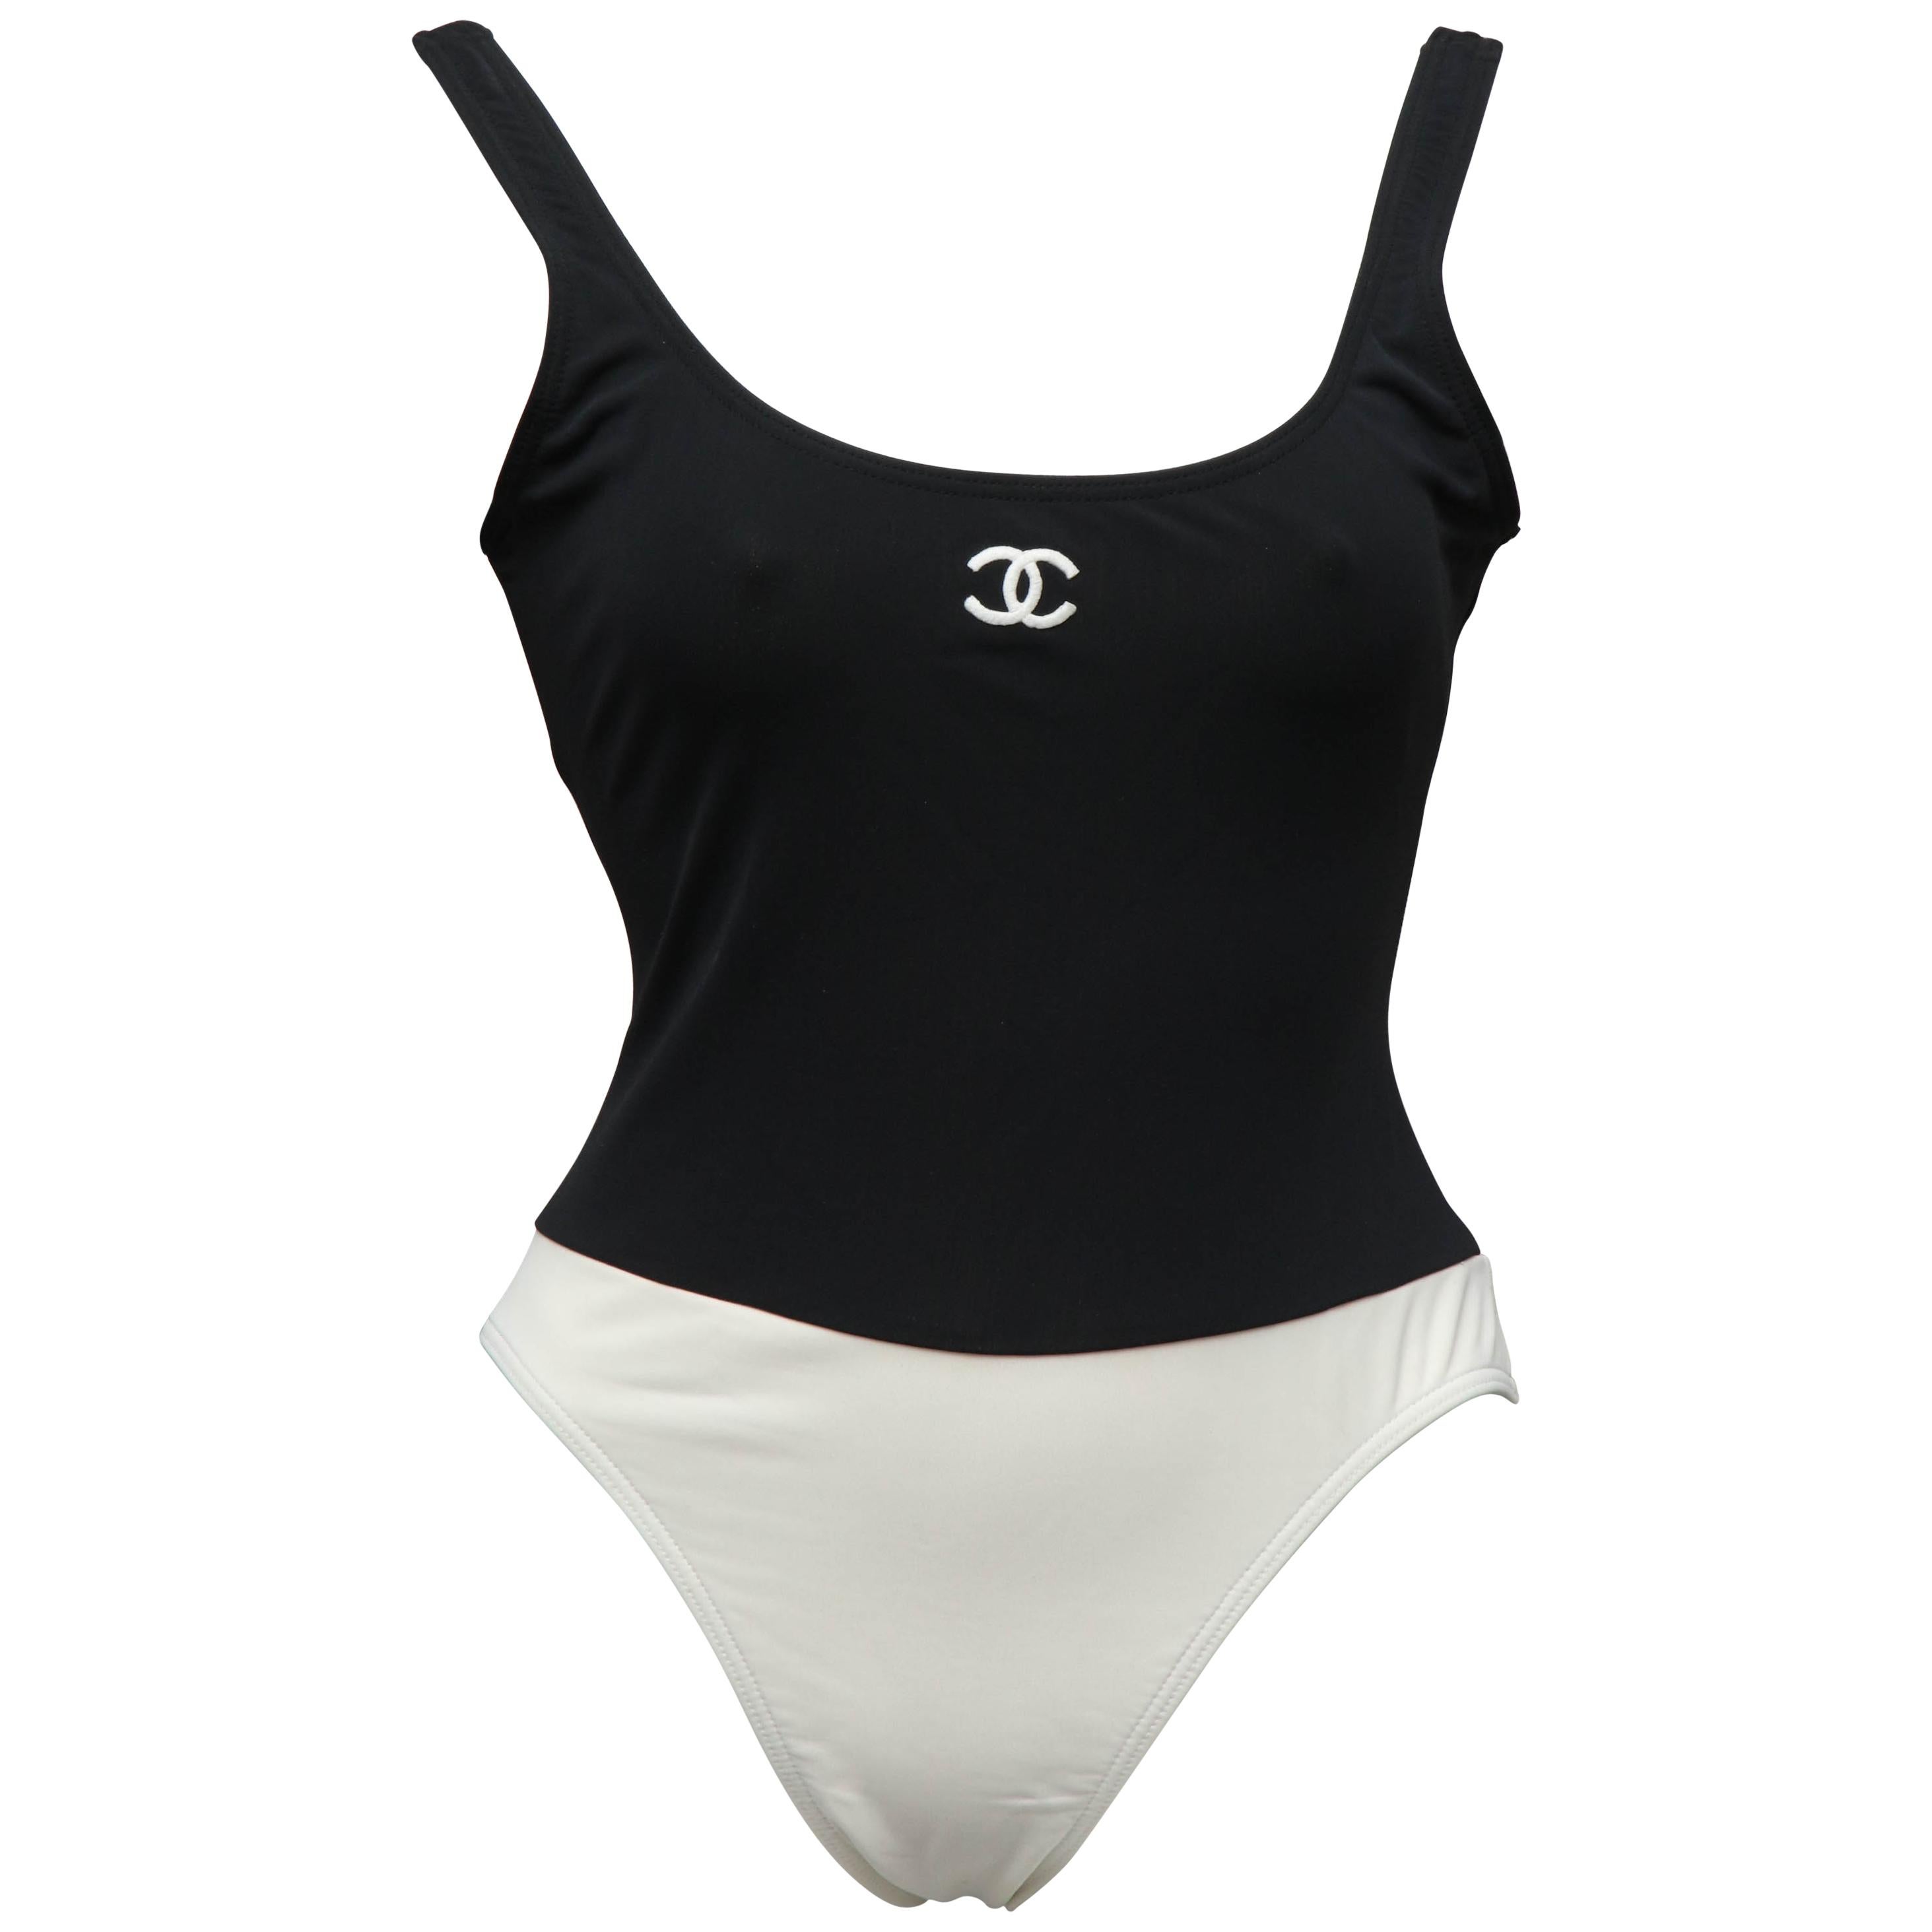 Chanel Black and White Swimwear with CC Logos